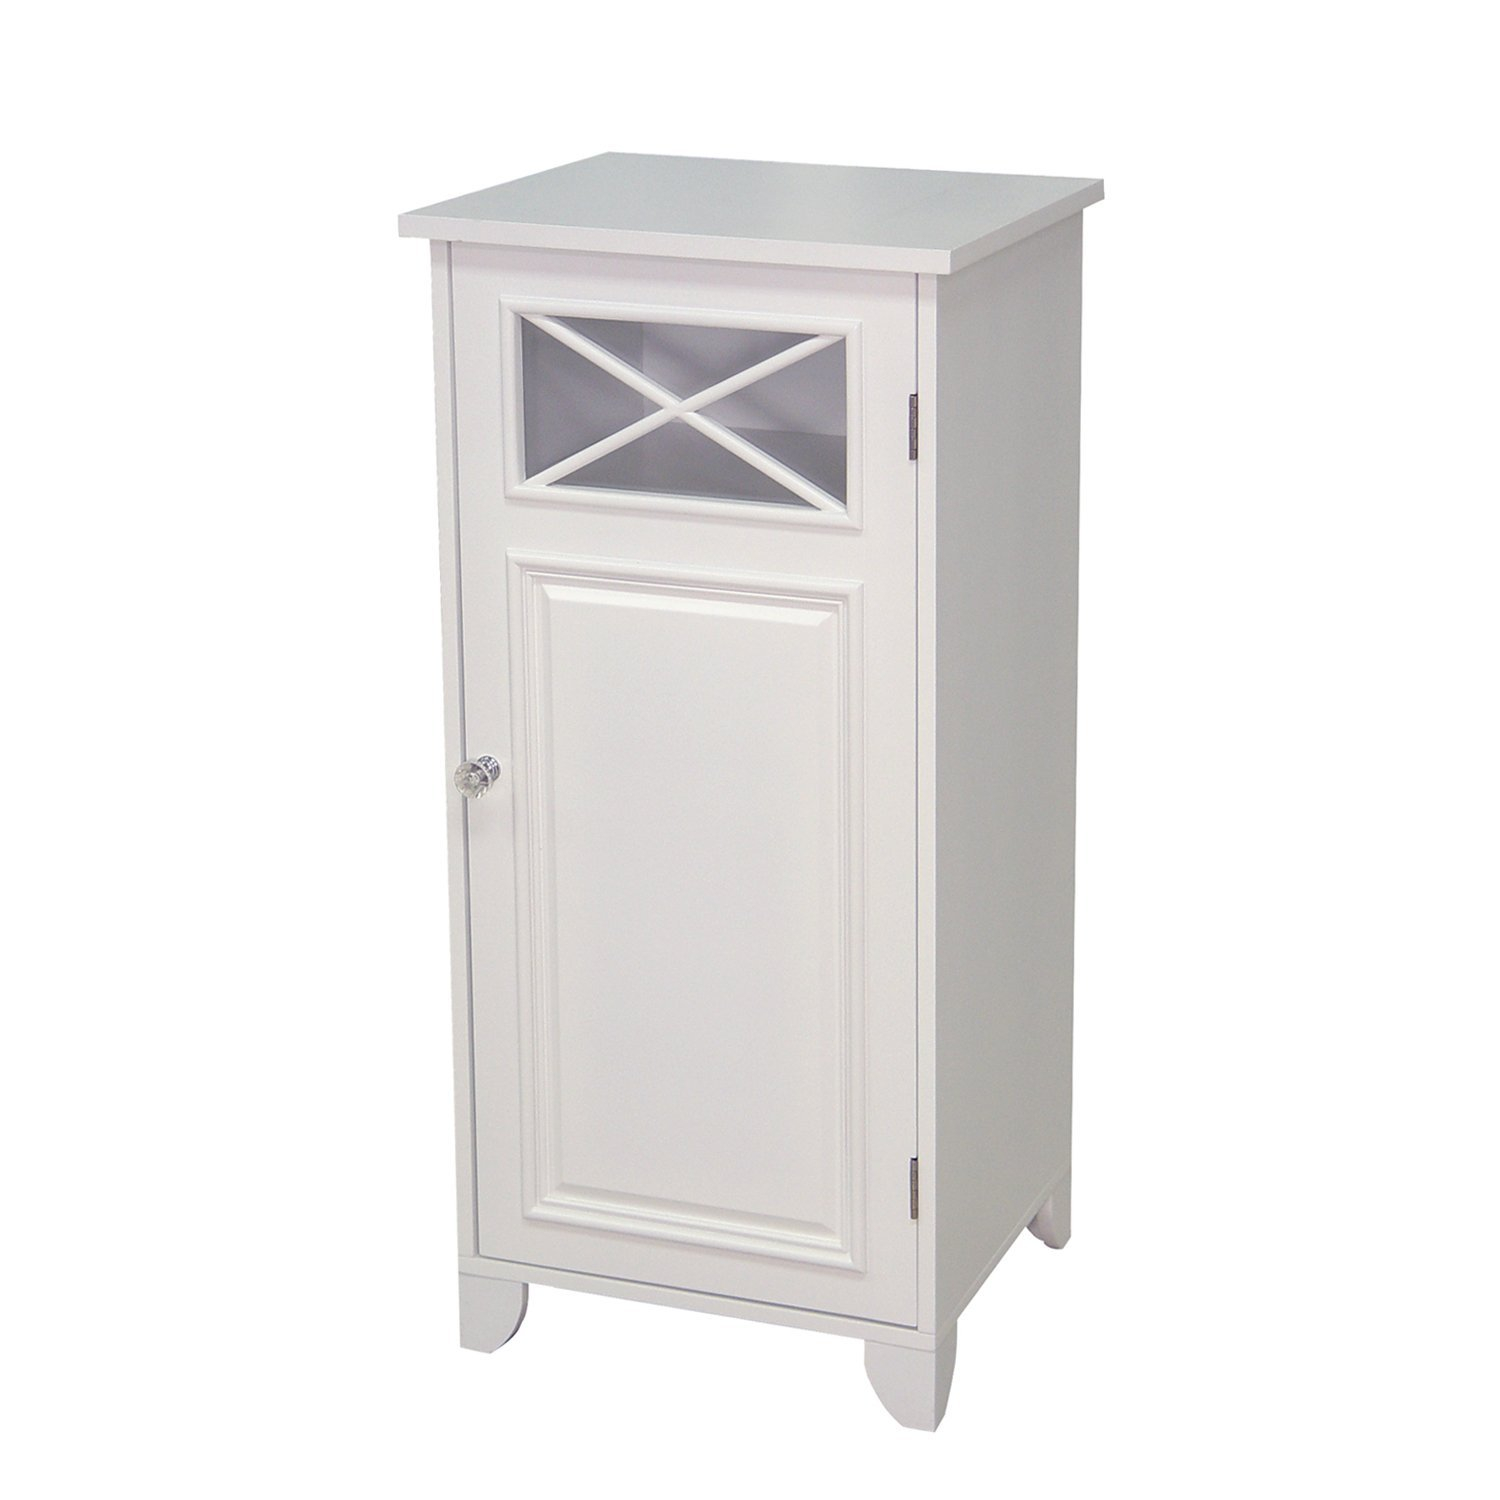 12 Awesome Bathroom Floor Cabinet With Doors Review regarding size 1500 X 1500